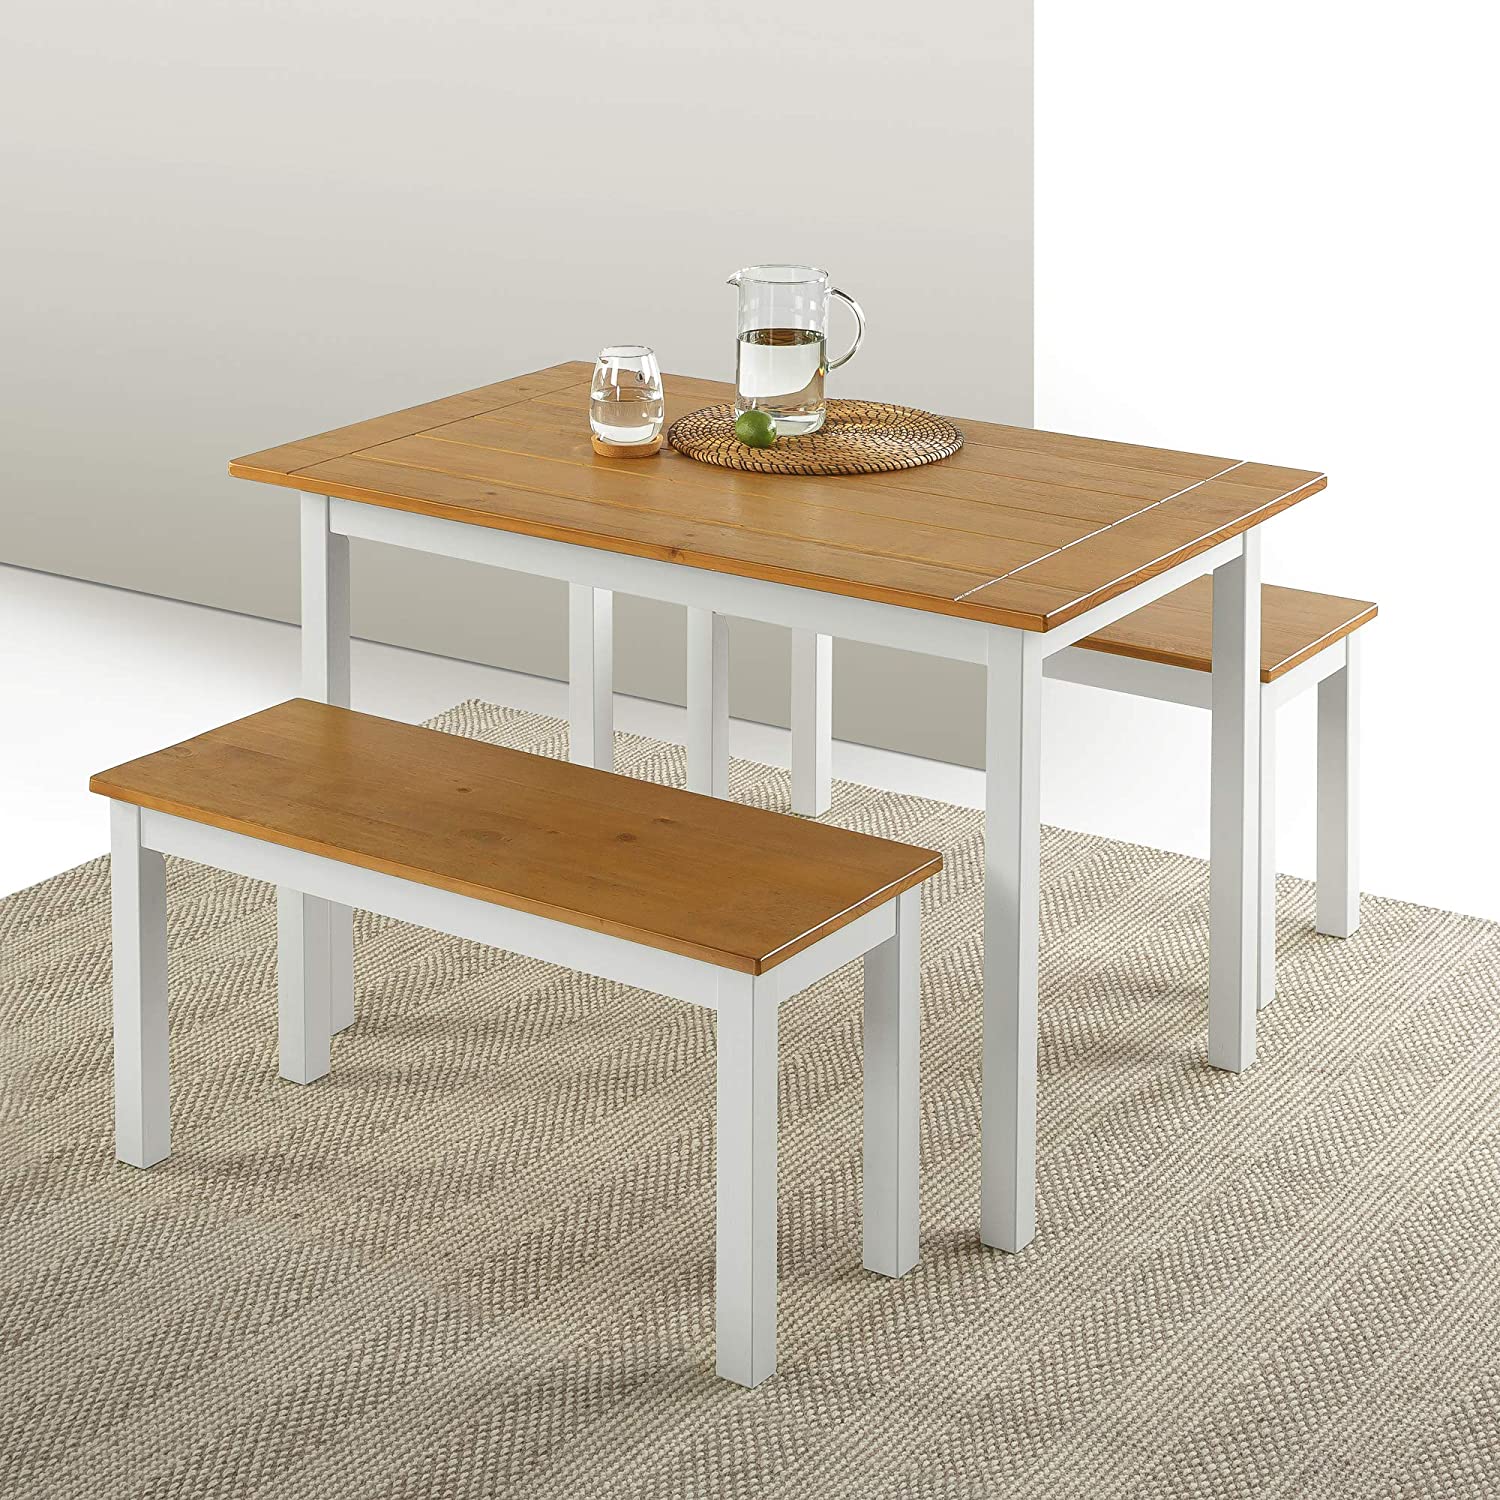 Zinus Farmhouse Dining Table with Two Benches